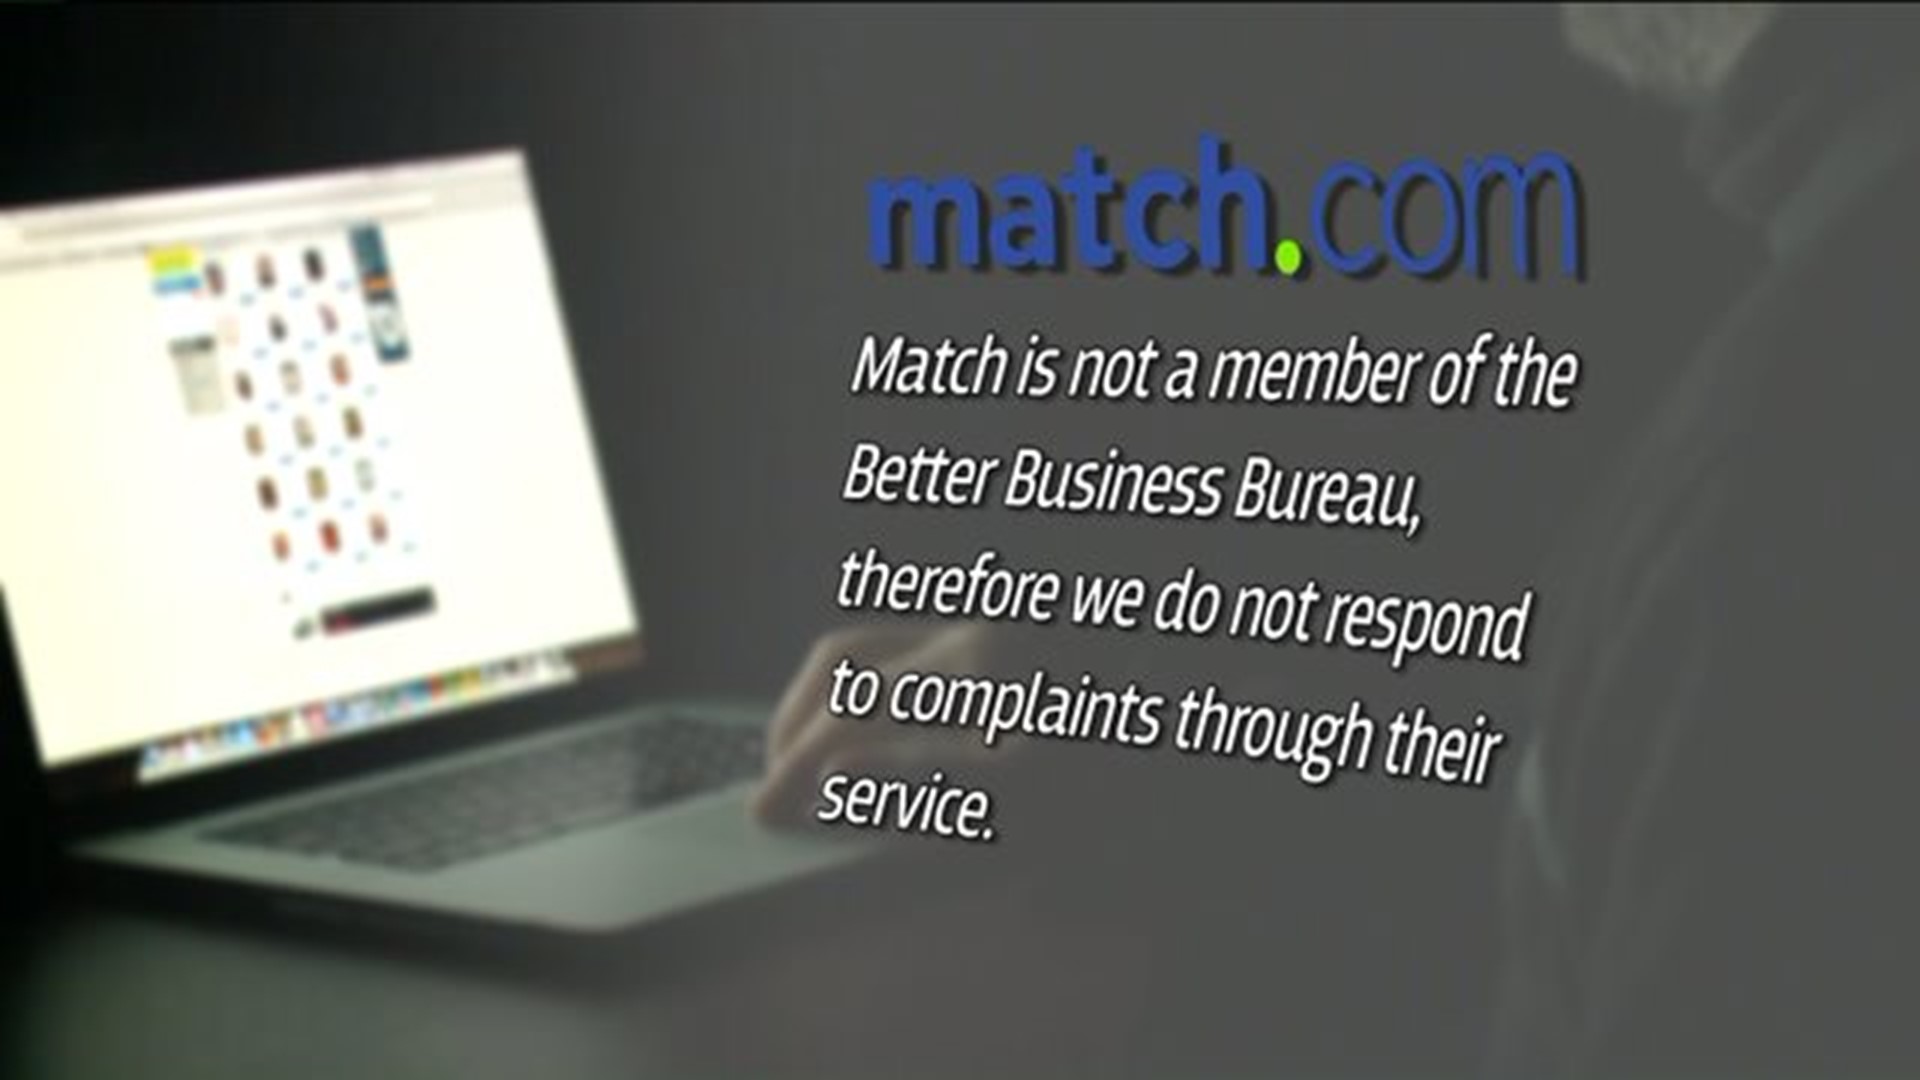 Match.com accused of continuing to charge customers after they canceled service